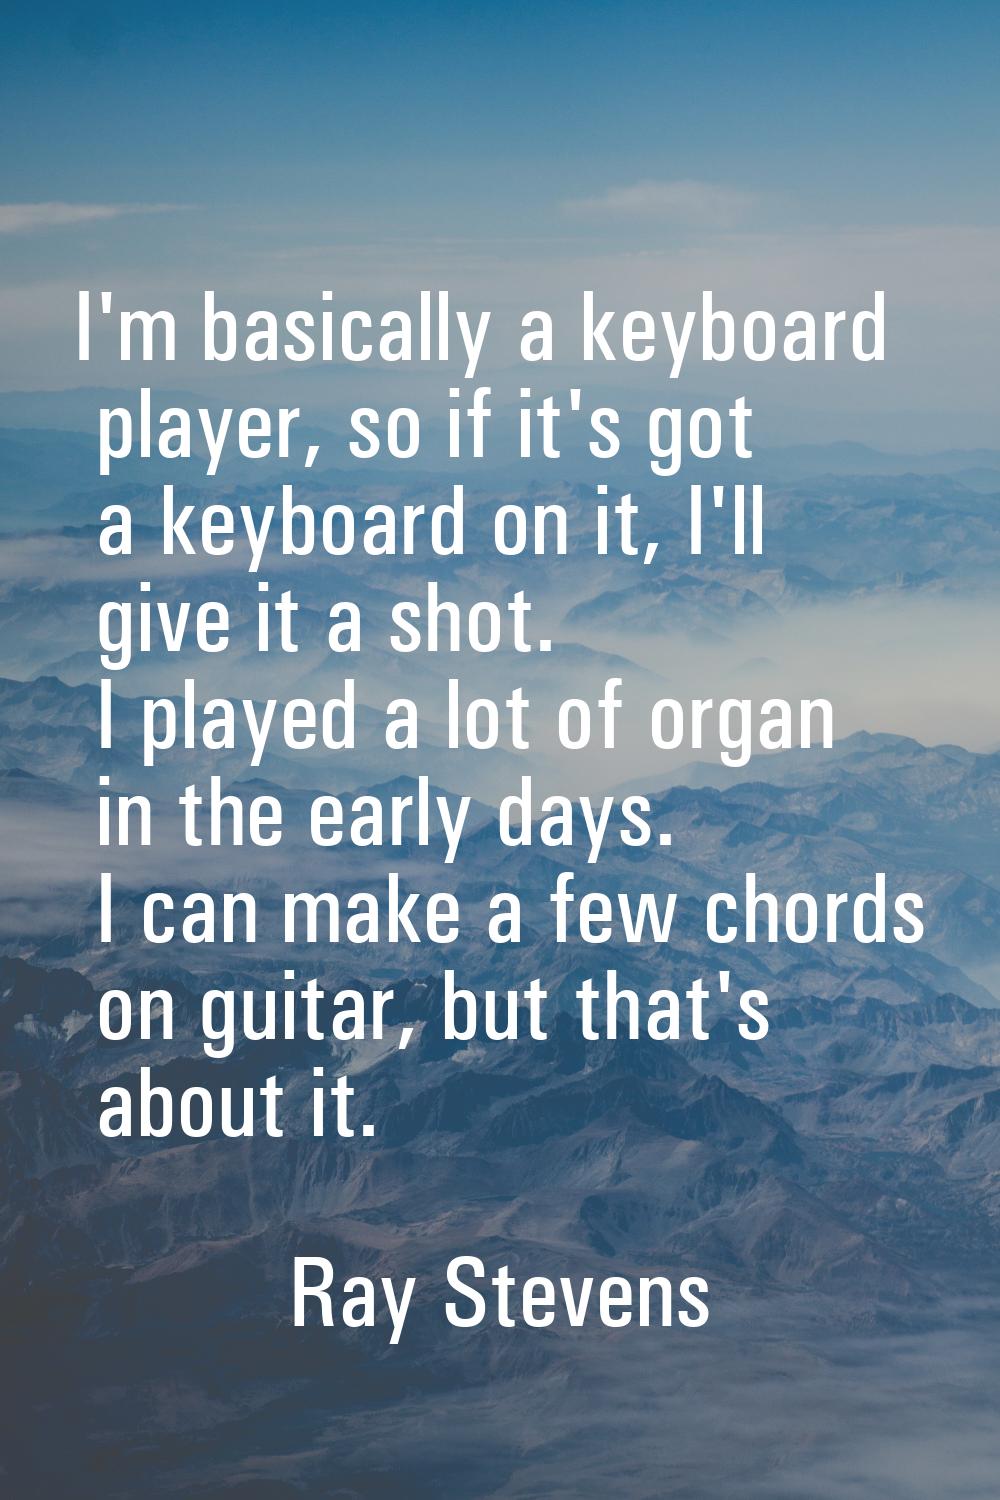 I'm basically a keyboard player, so if it's got a keyboard on it, I'll give it a shot. I played a l